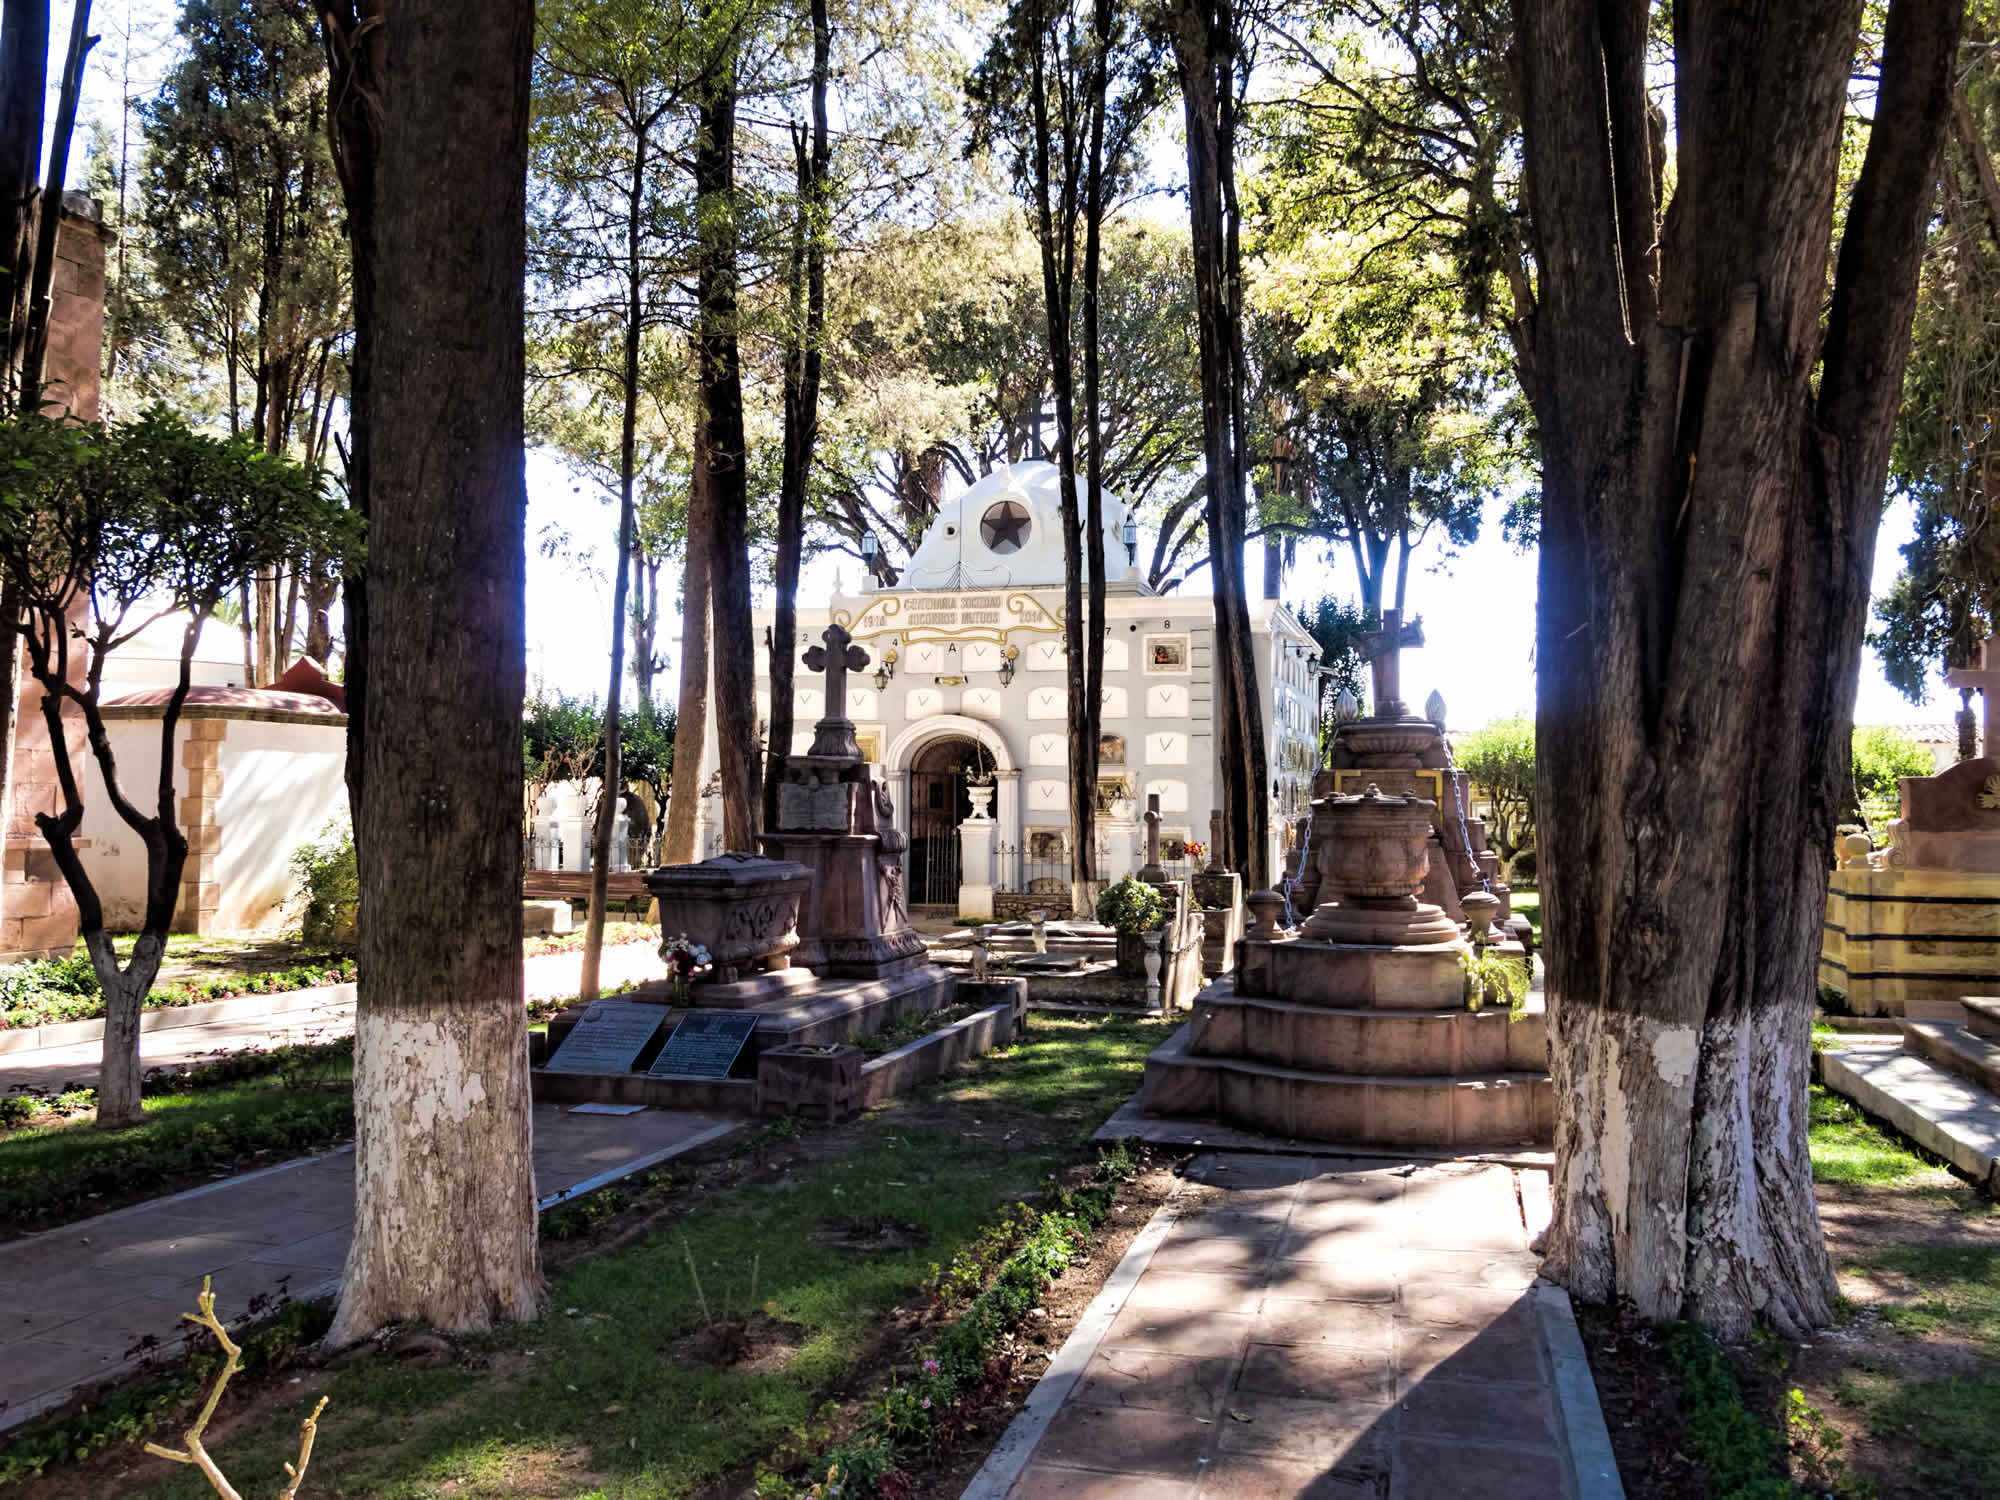 Sucre General Cemetery